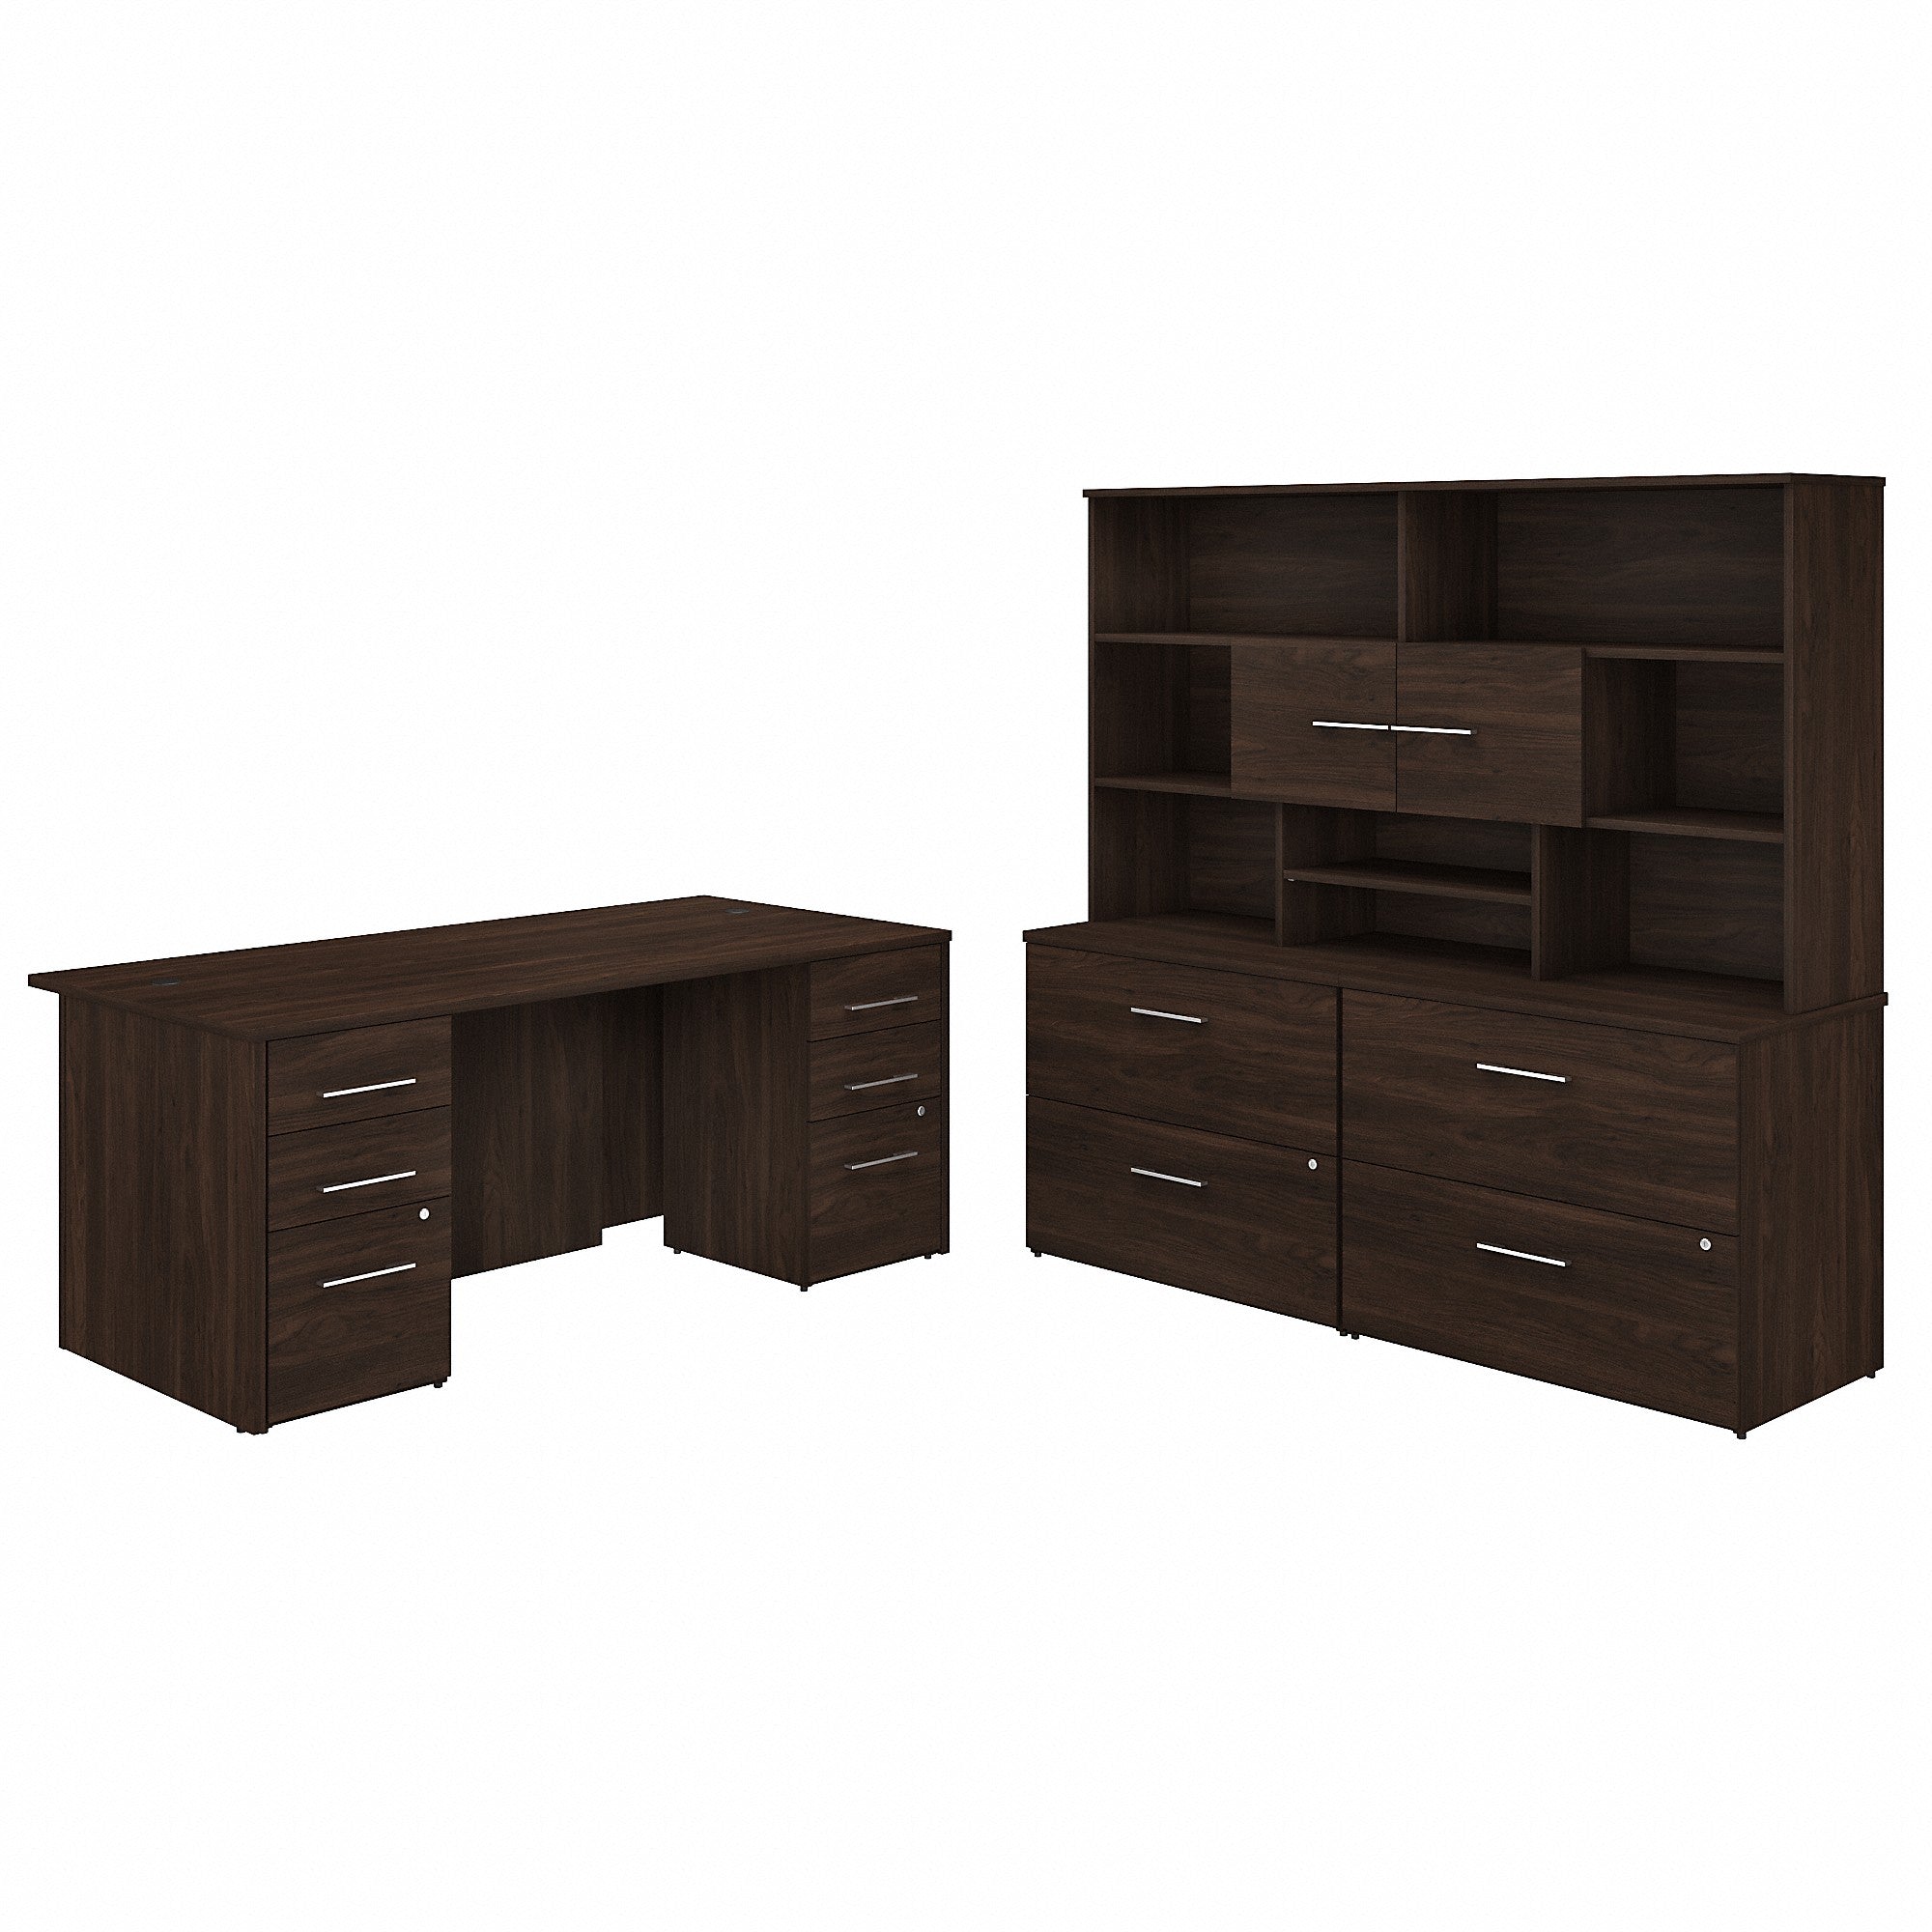 Bush Business Furniture Office 500 72W x 36D Executive Desk with Drawers, Lateral File Cabinets and Hutch | Black Walnut